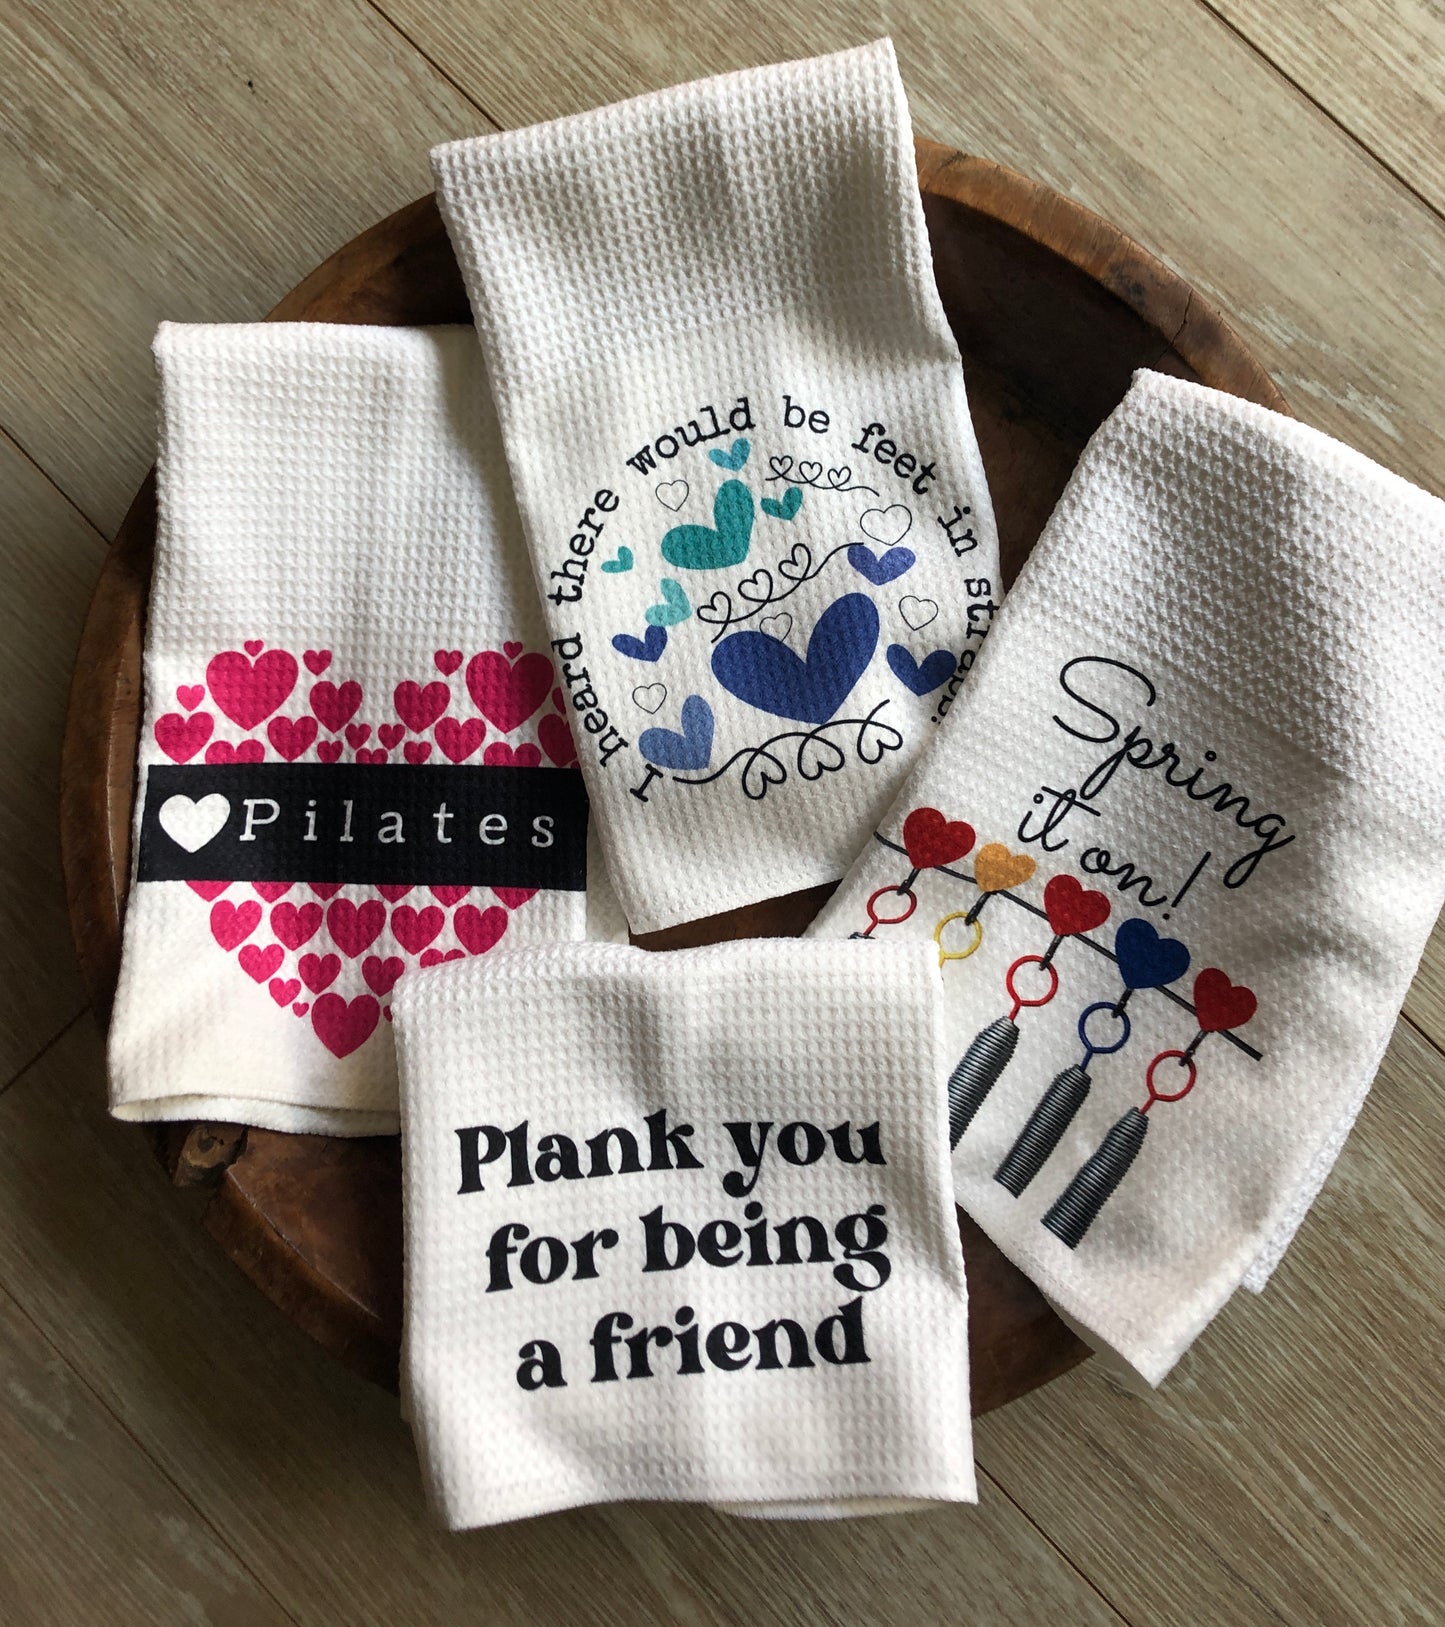 Pilates Towel set. Pilates gift,Pilates student gifts, Feet in straps, Spring it on, Pilates heart & Planks you for being a friend waffle weave towel set.